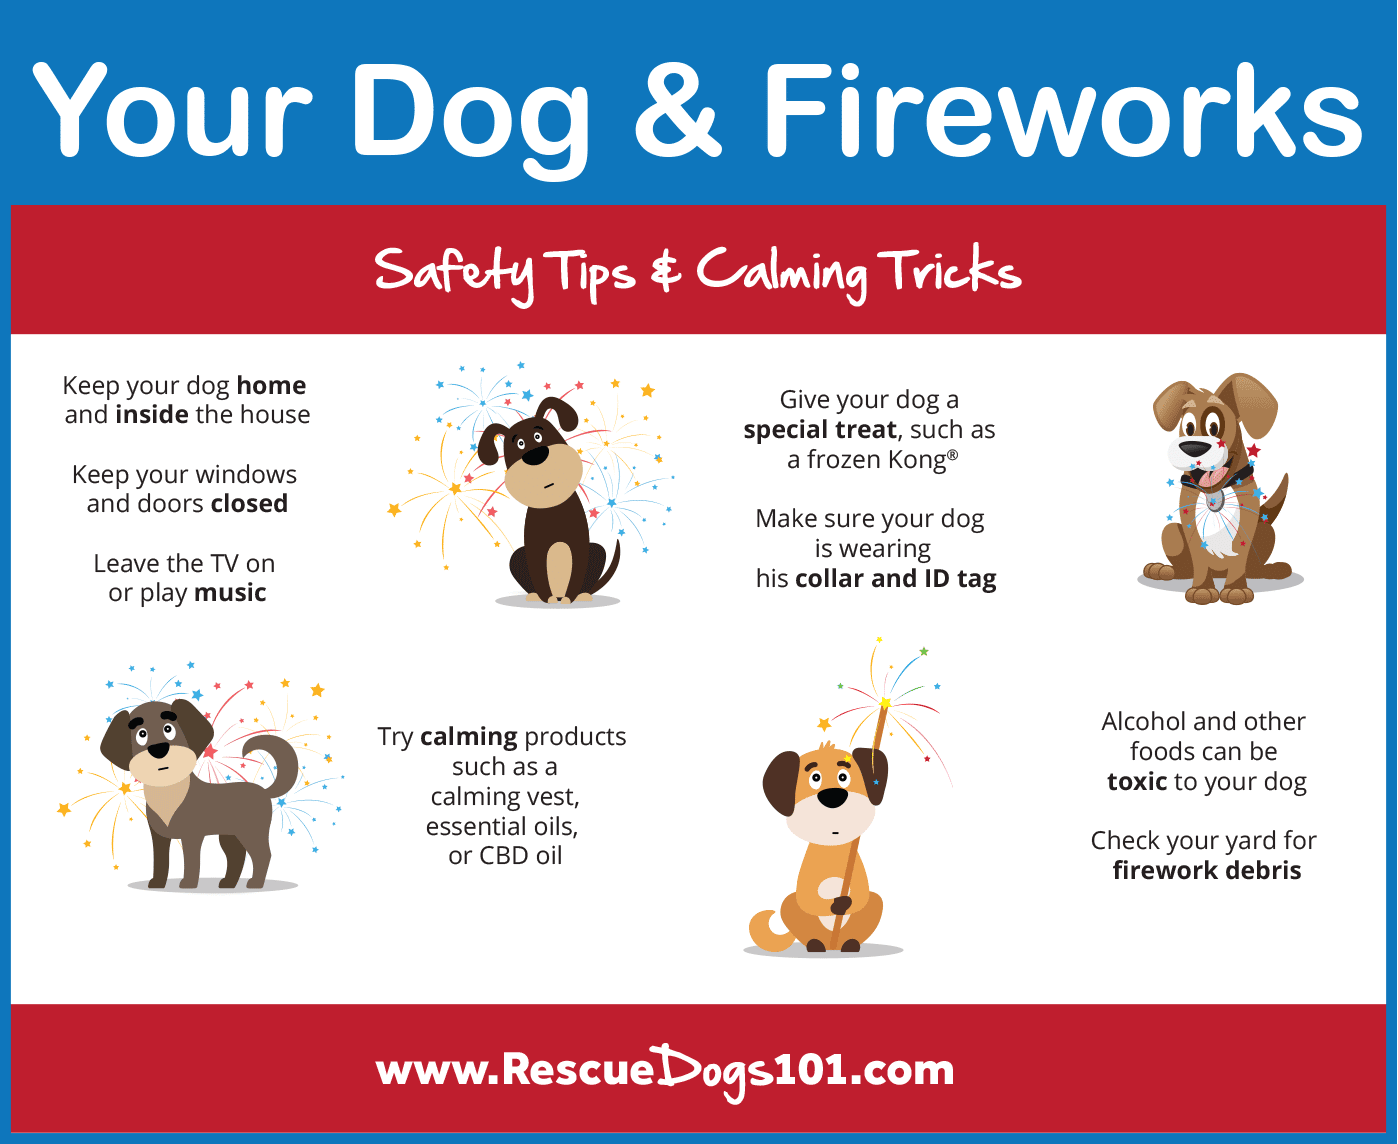 How to help dog fireworks anxiety [+10 Tips]